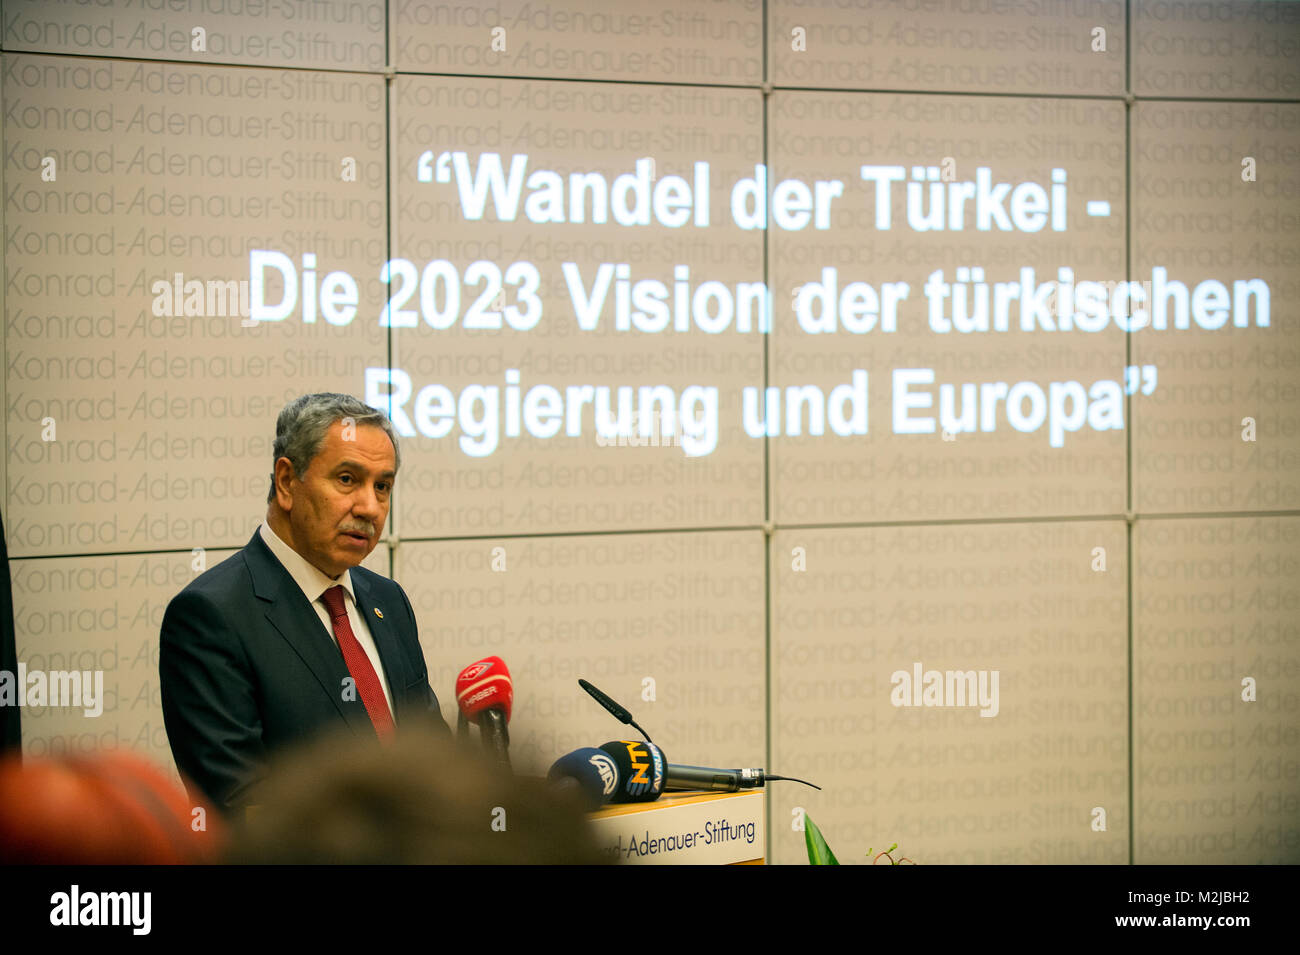 Deputy Prime Minister of Turkey Bülent Arinç gives a speech about the 2023 Vision of the Turkish Government and Europe. the session was stoped by some protesters from TGB (Turkish Youth Union) against the current policy of Turkey. Stock Photo